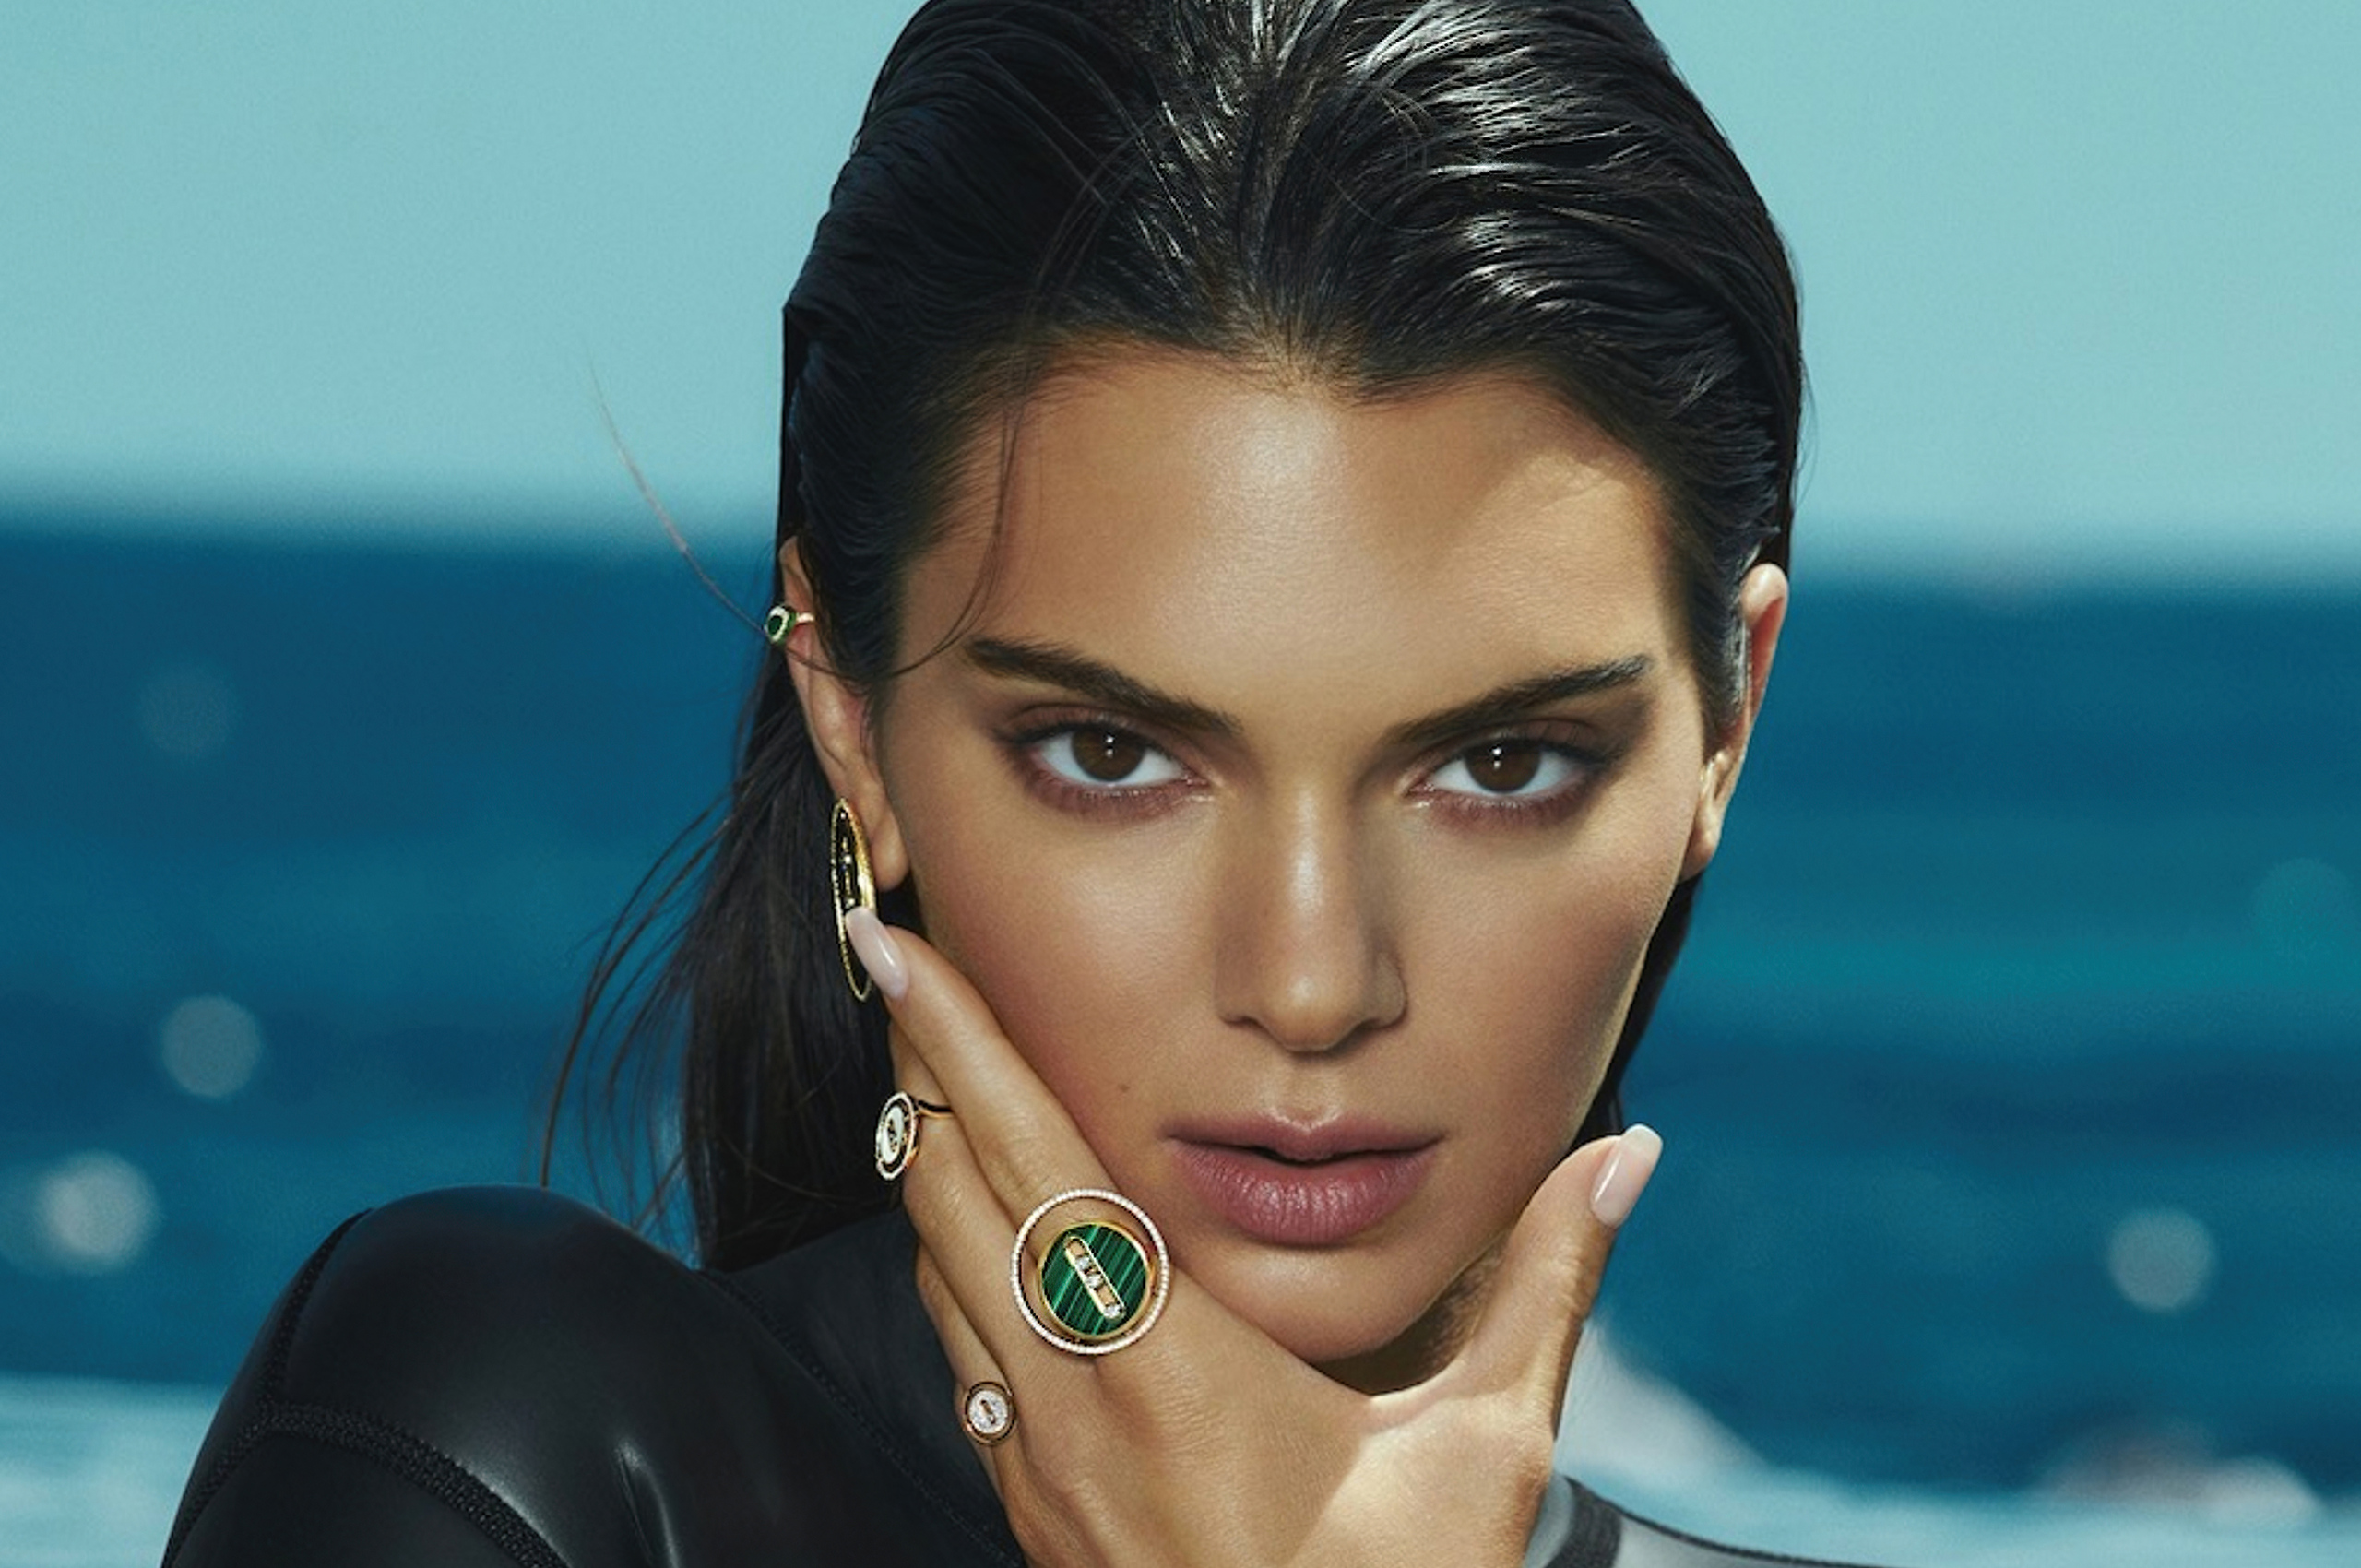 2022-kendall-jenner-messika-jewelry-campaign-4k-lh.jpg